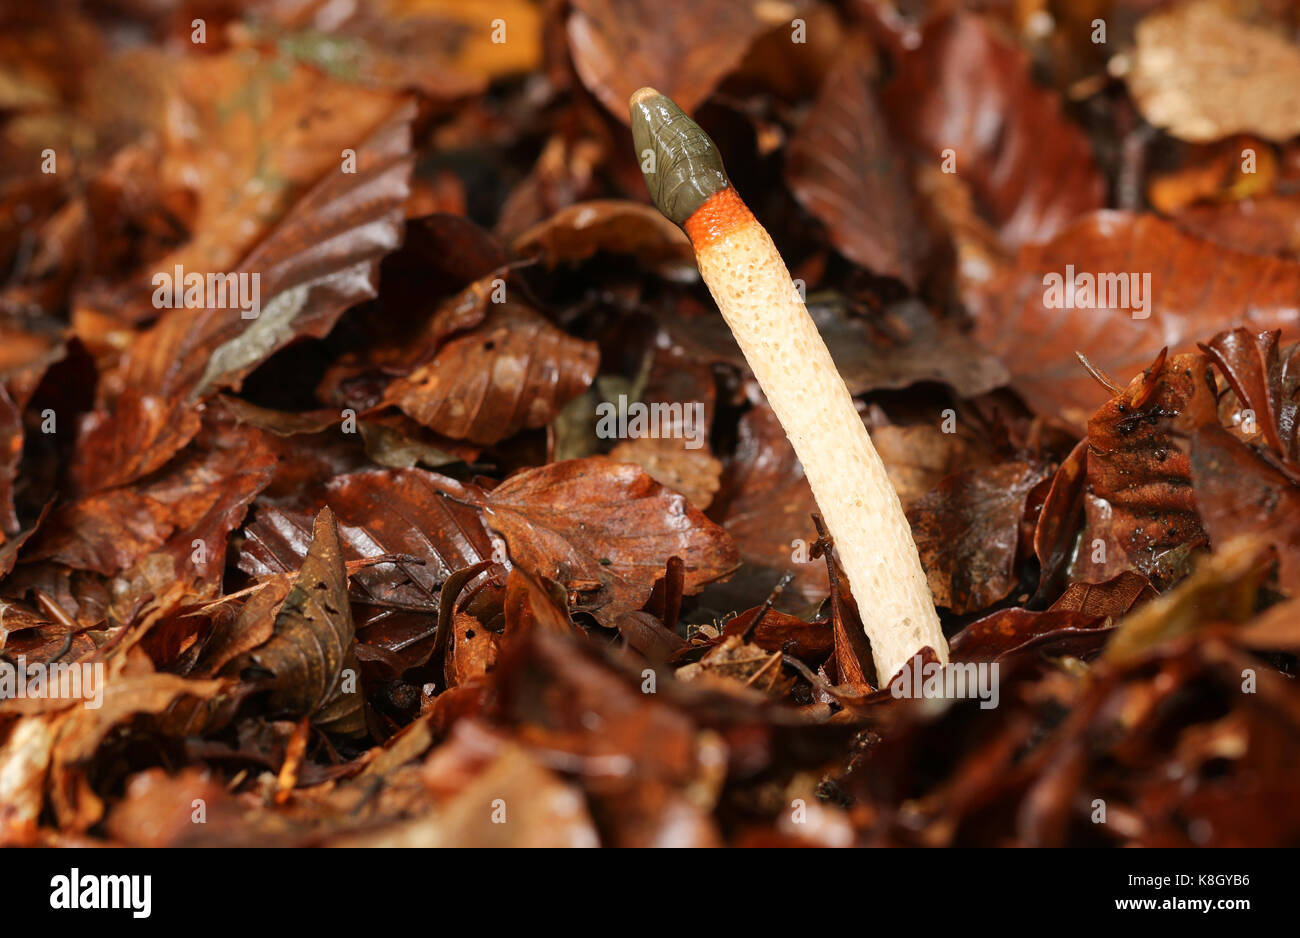 Dog Stinkhorn (Mutinus caninus) growing out of the forest floor. Stock Photo